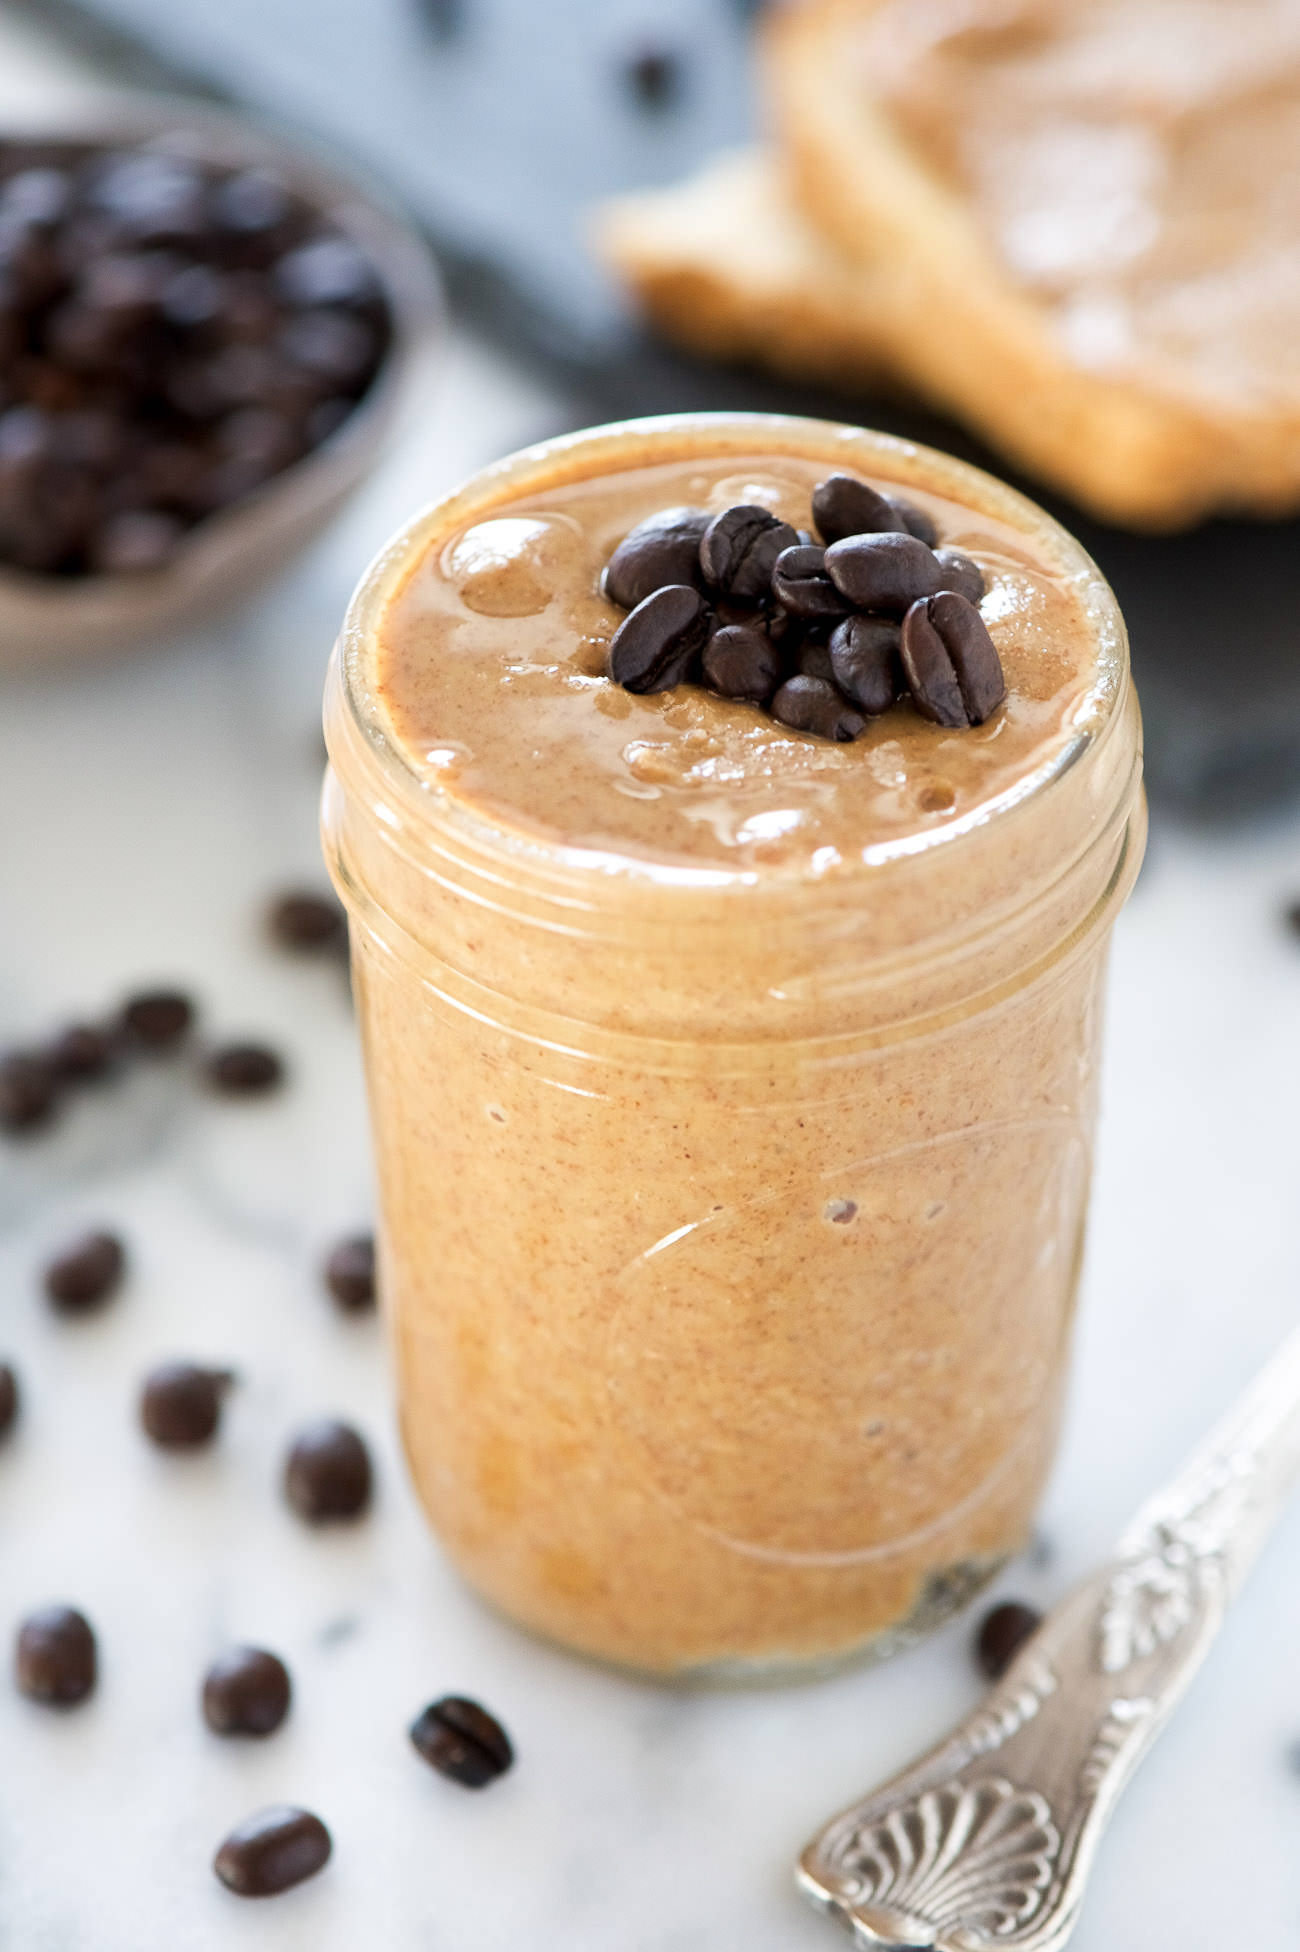 Vanilla Espresso Almond Butter is a homemade version of a store bought favorite! Roasted almonds mixed with vanilla beans and espresso for an energy charged almond butter!